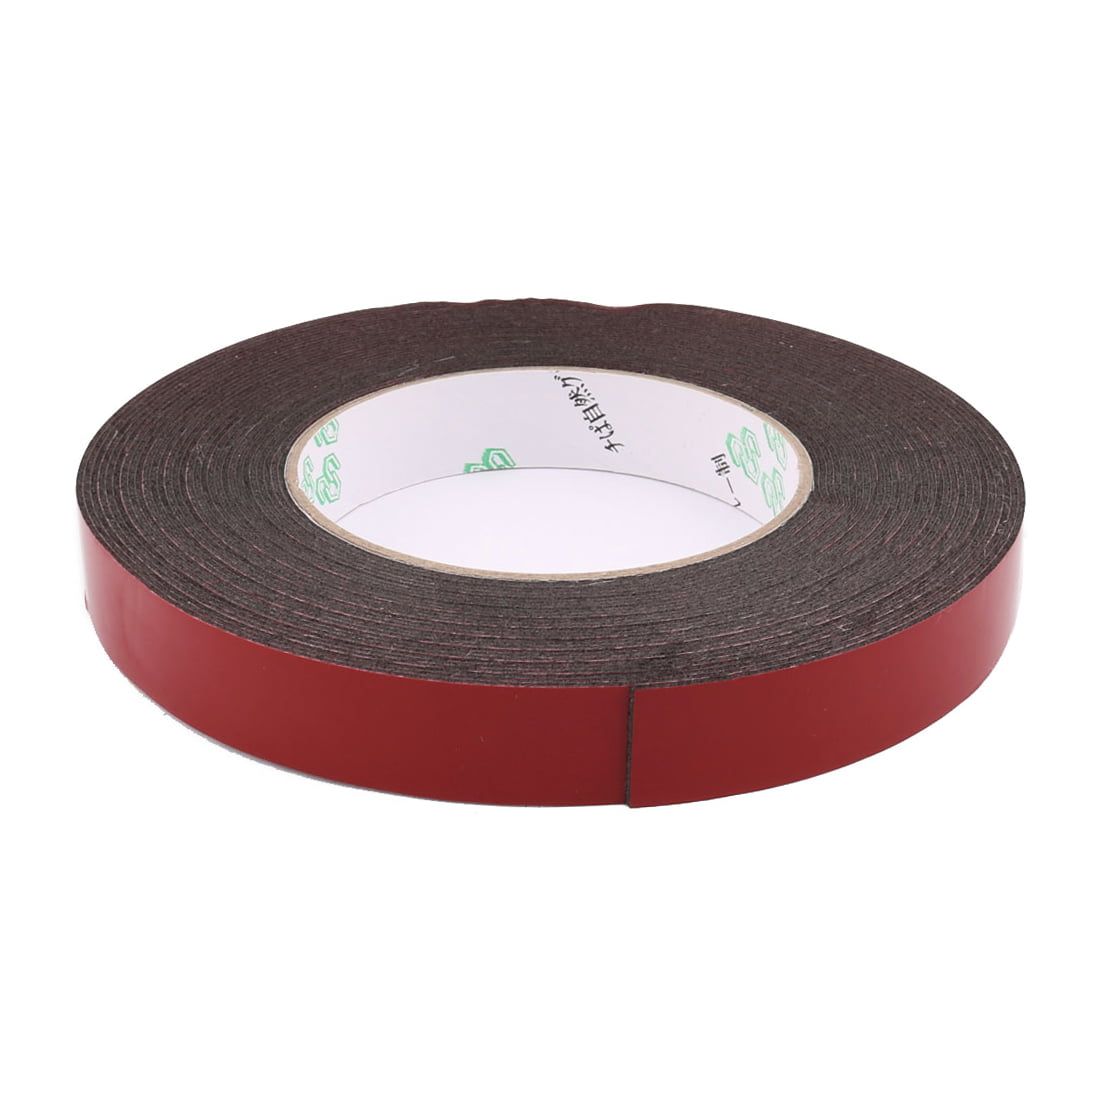 Cutting Double Sided Foam Tape with a String (fishing line, floss